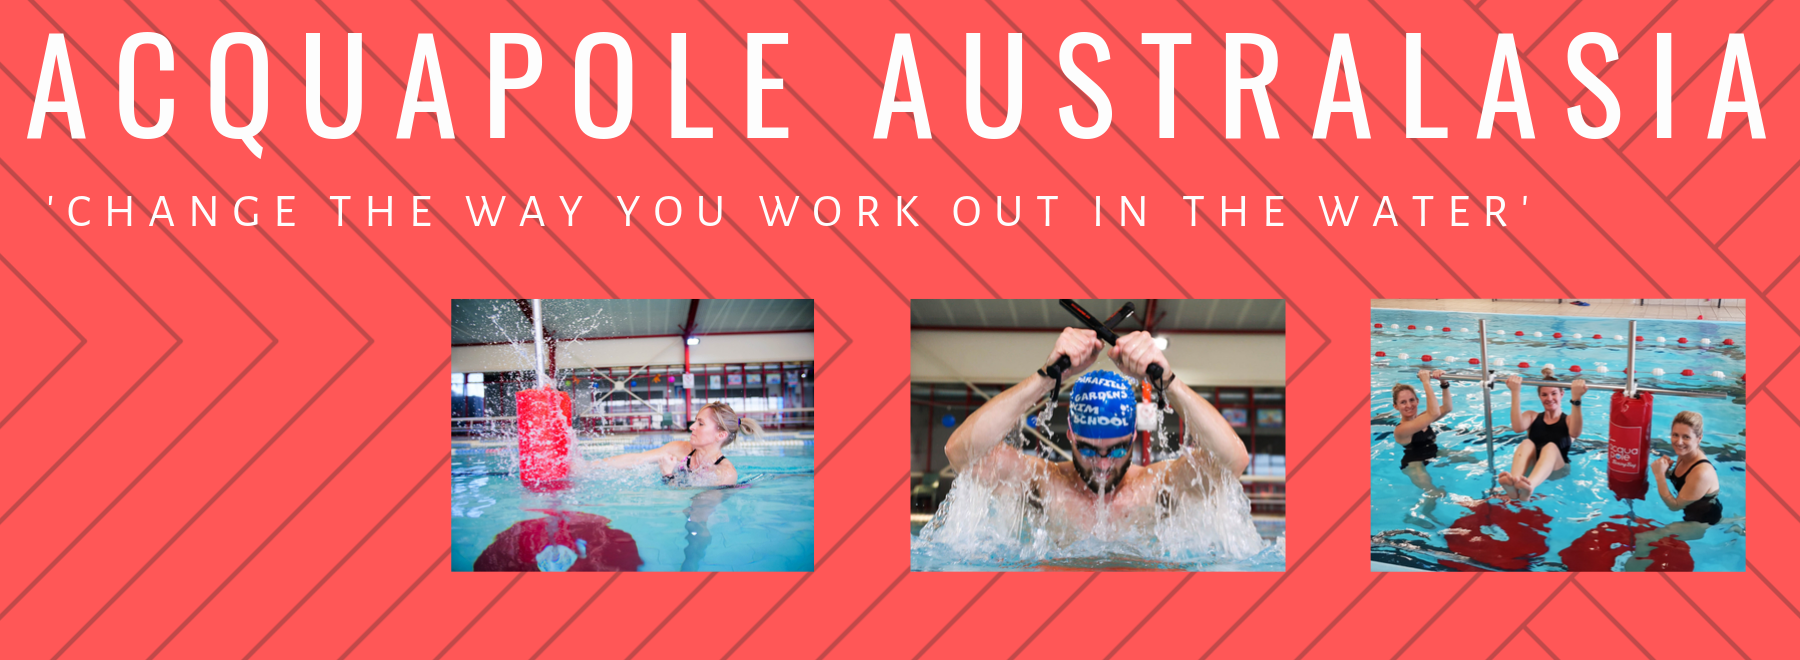 Acuqapole Australasia - Change the way you work out in the water